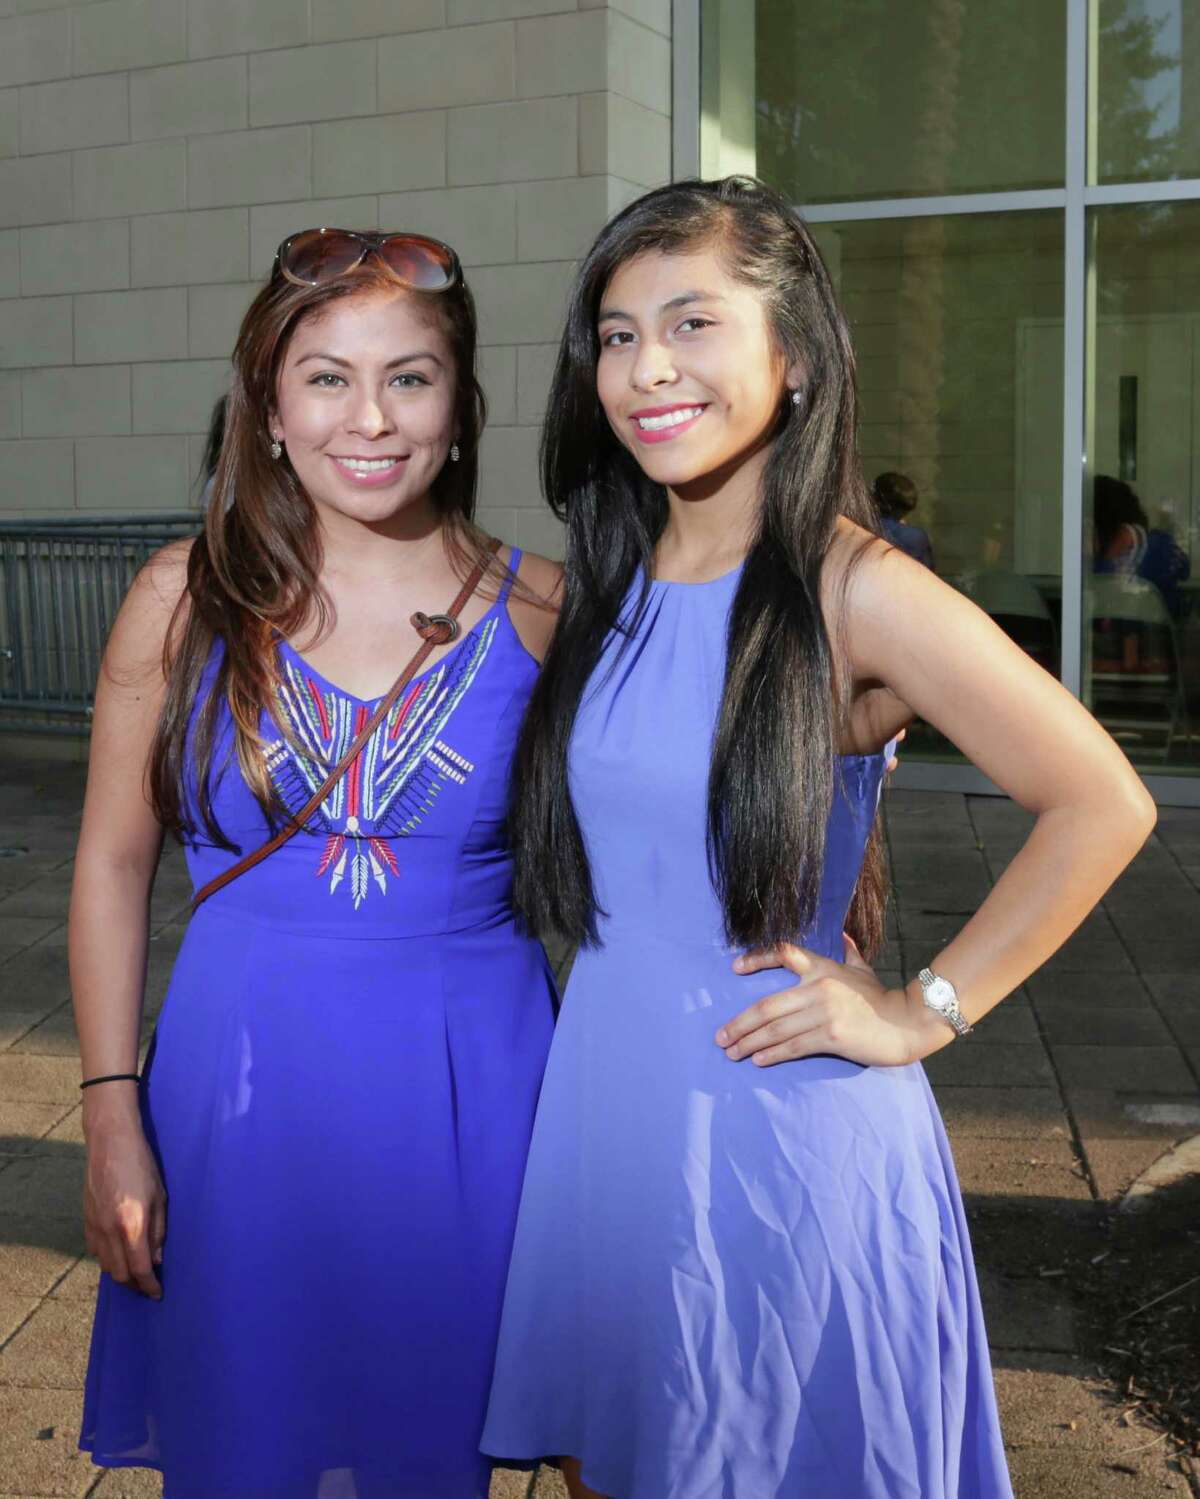 Fans pose for a photo before the Sam Smith concert at the Toyota Center Friday, Aug. 14, 2015, in Houston.